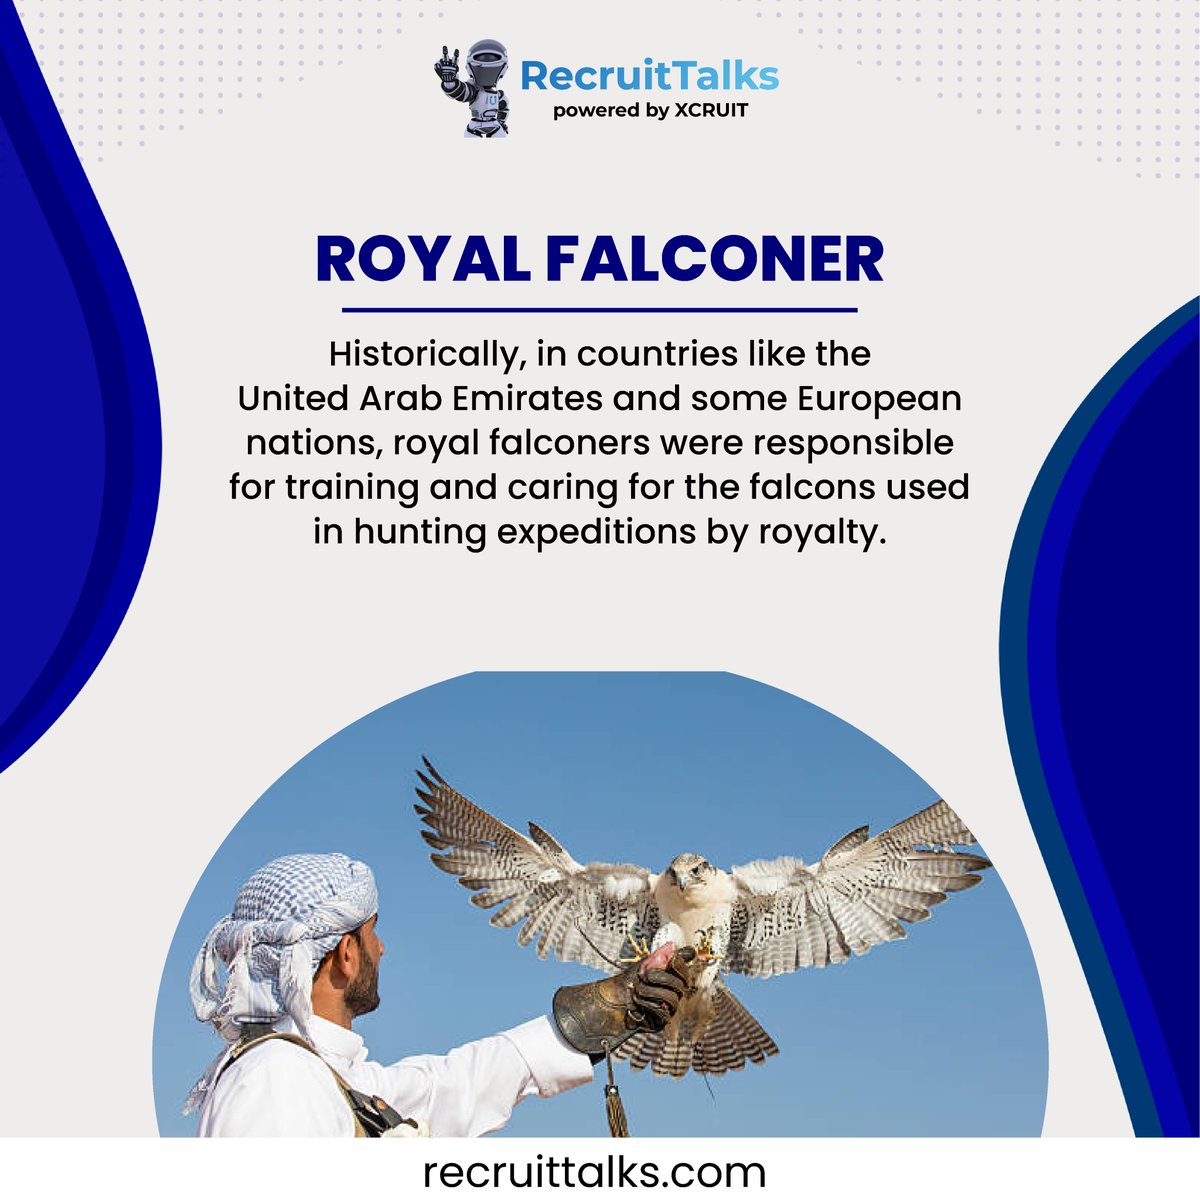 Wings of Royalty: The Great Tradition of Royal Falconry!
.
.
#Recruitorr #IAmRecruitorr #RecruitResearch #UniqueJobs #InterestingFacts